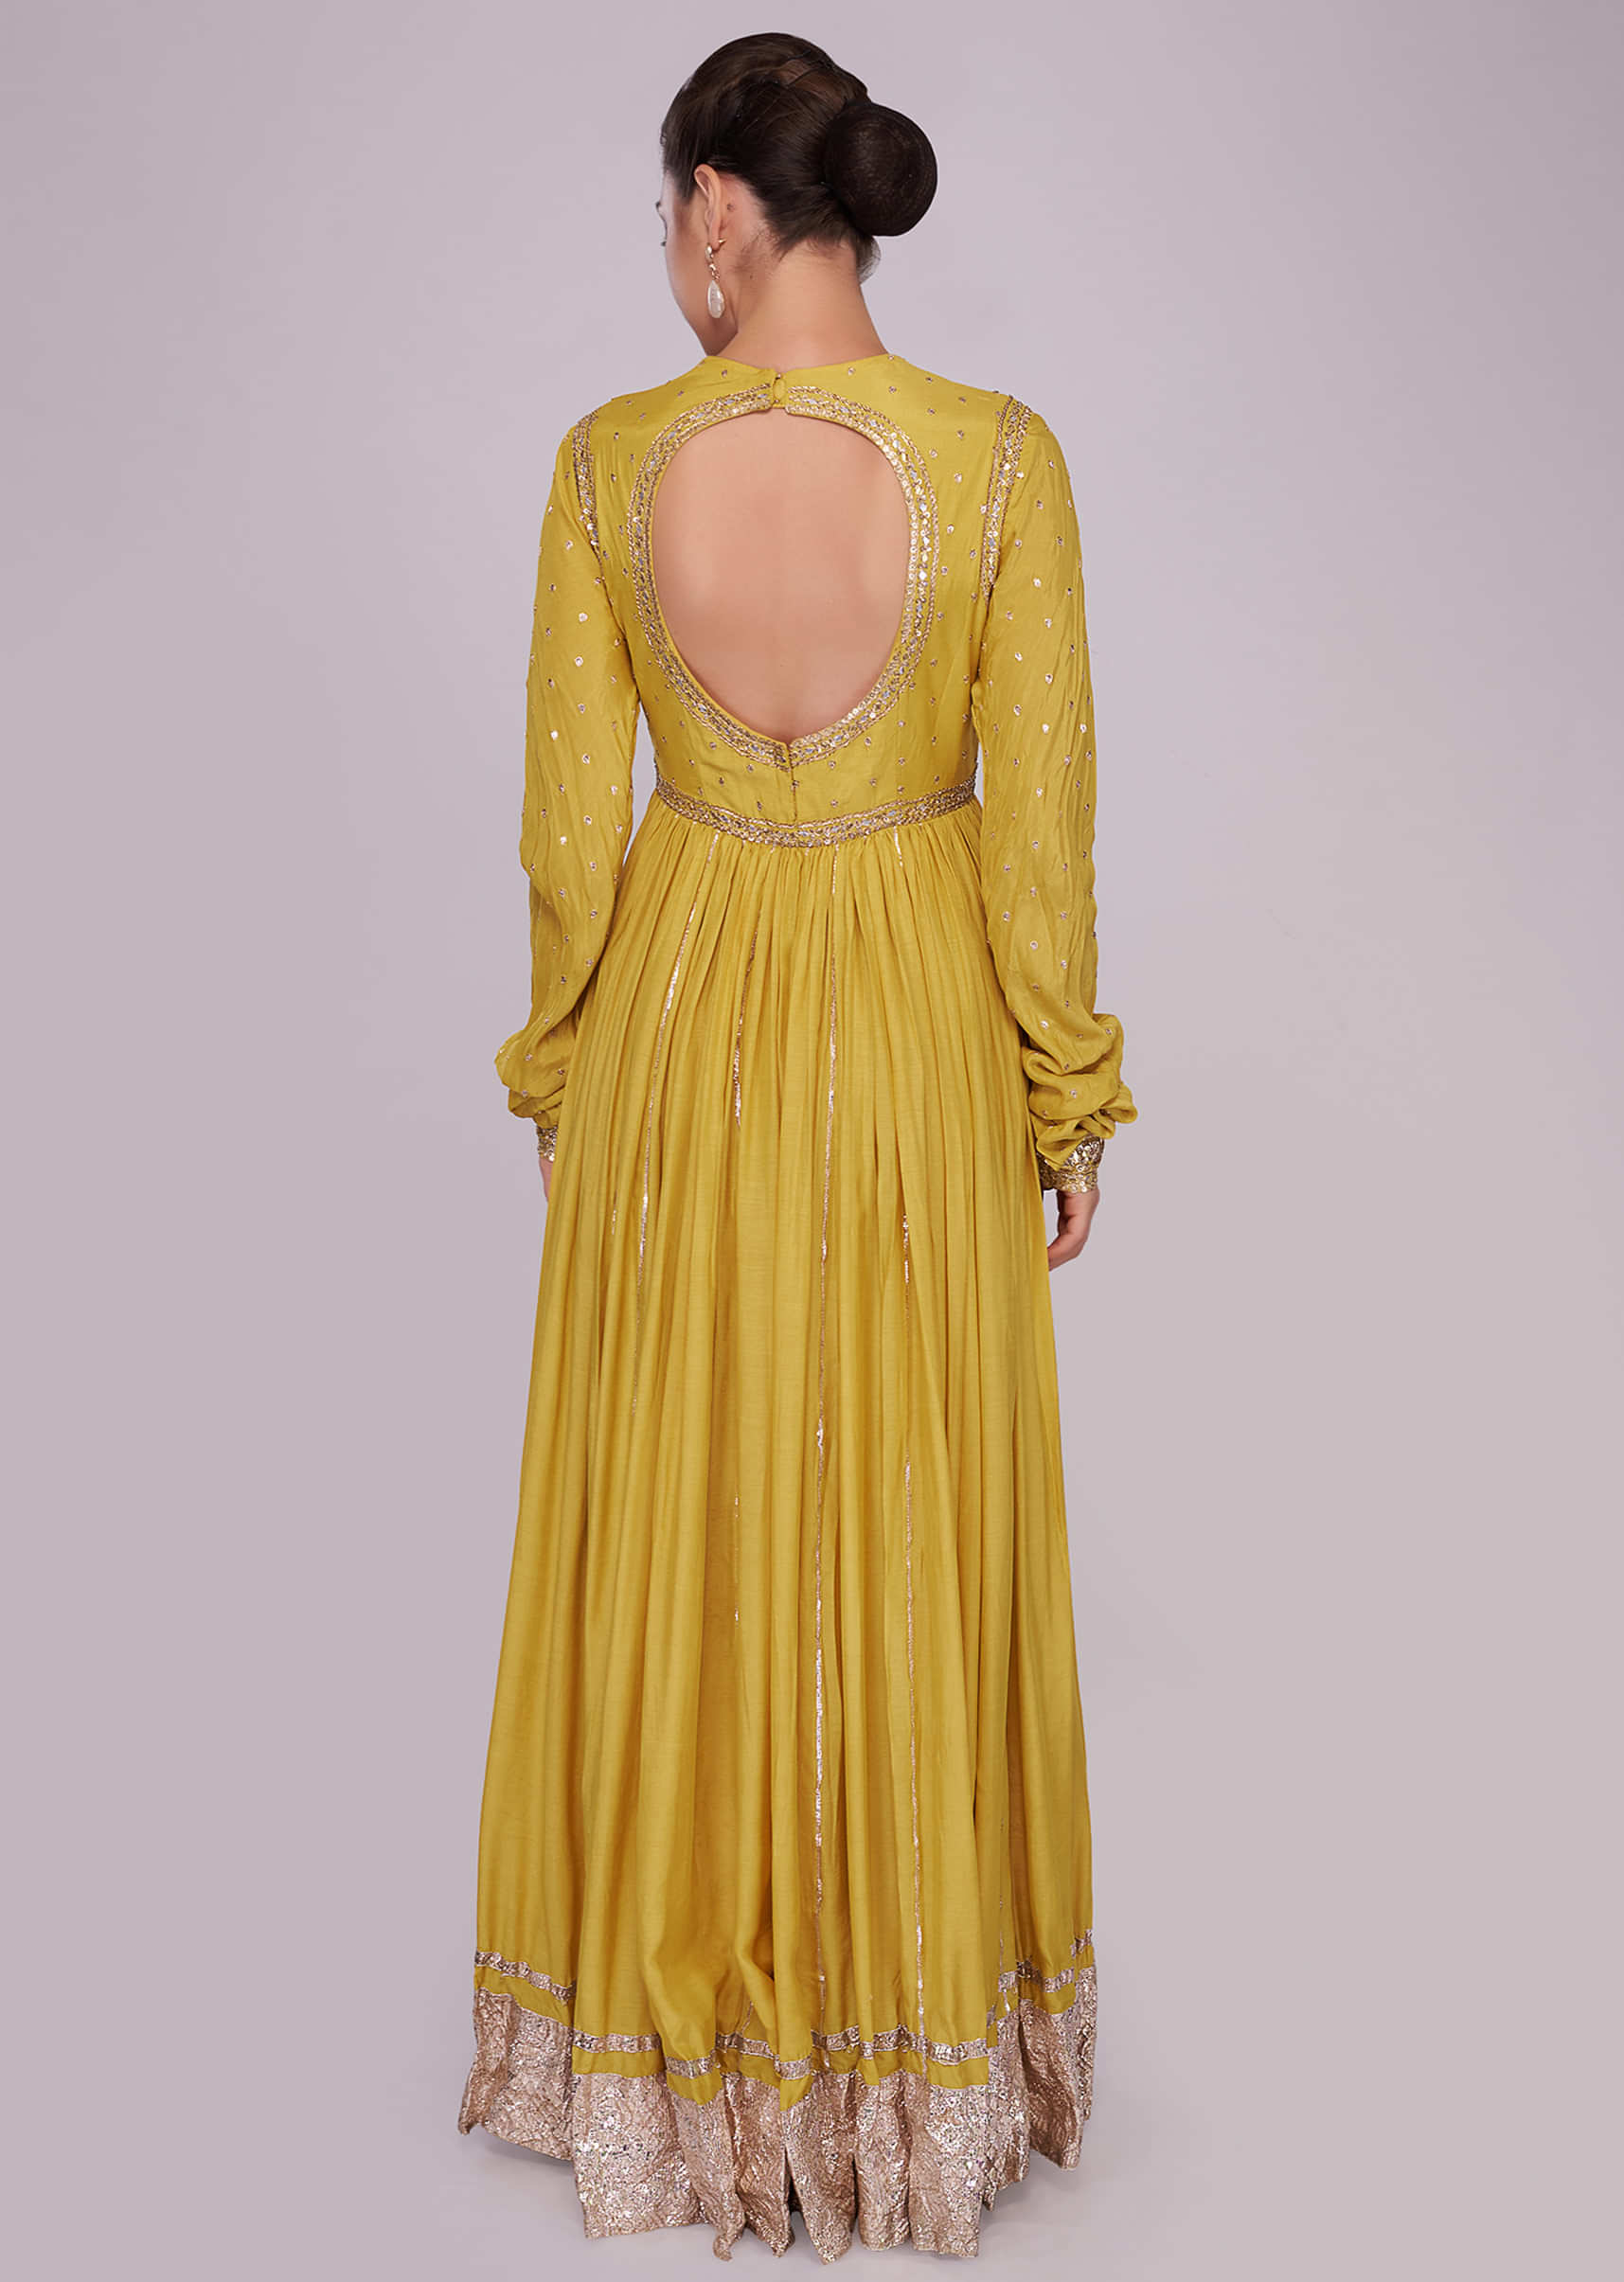 Tuscan yellow dress with embroidered bodice